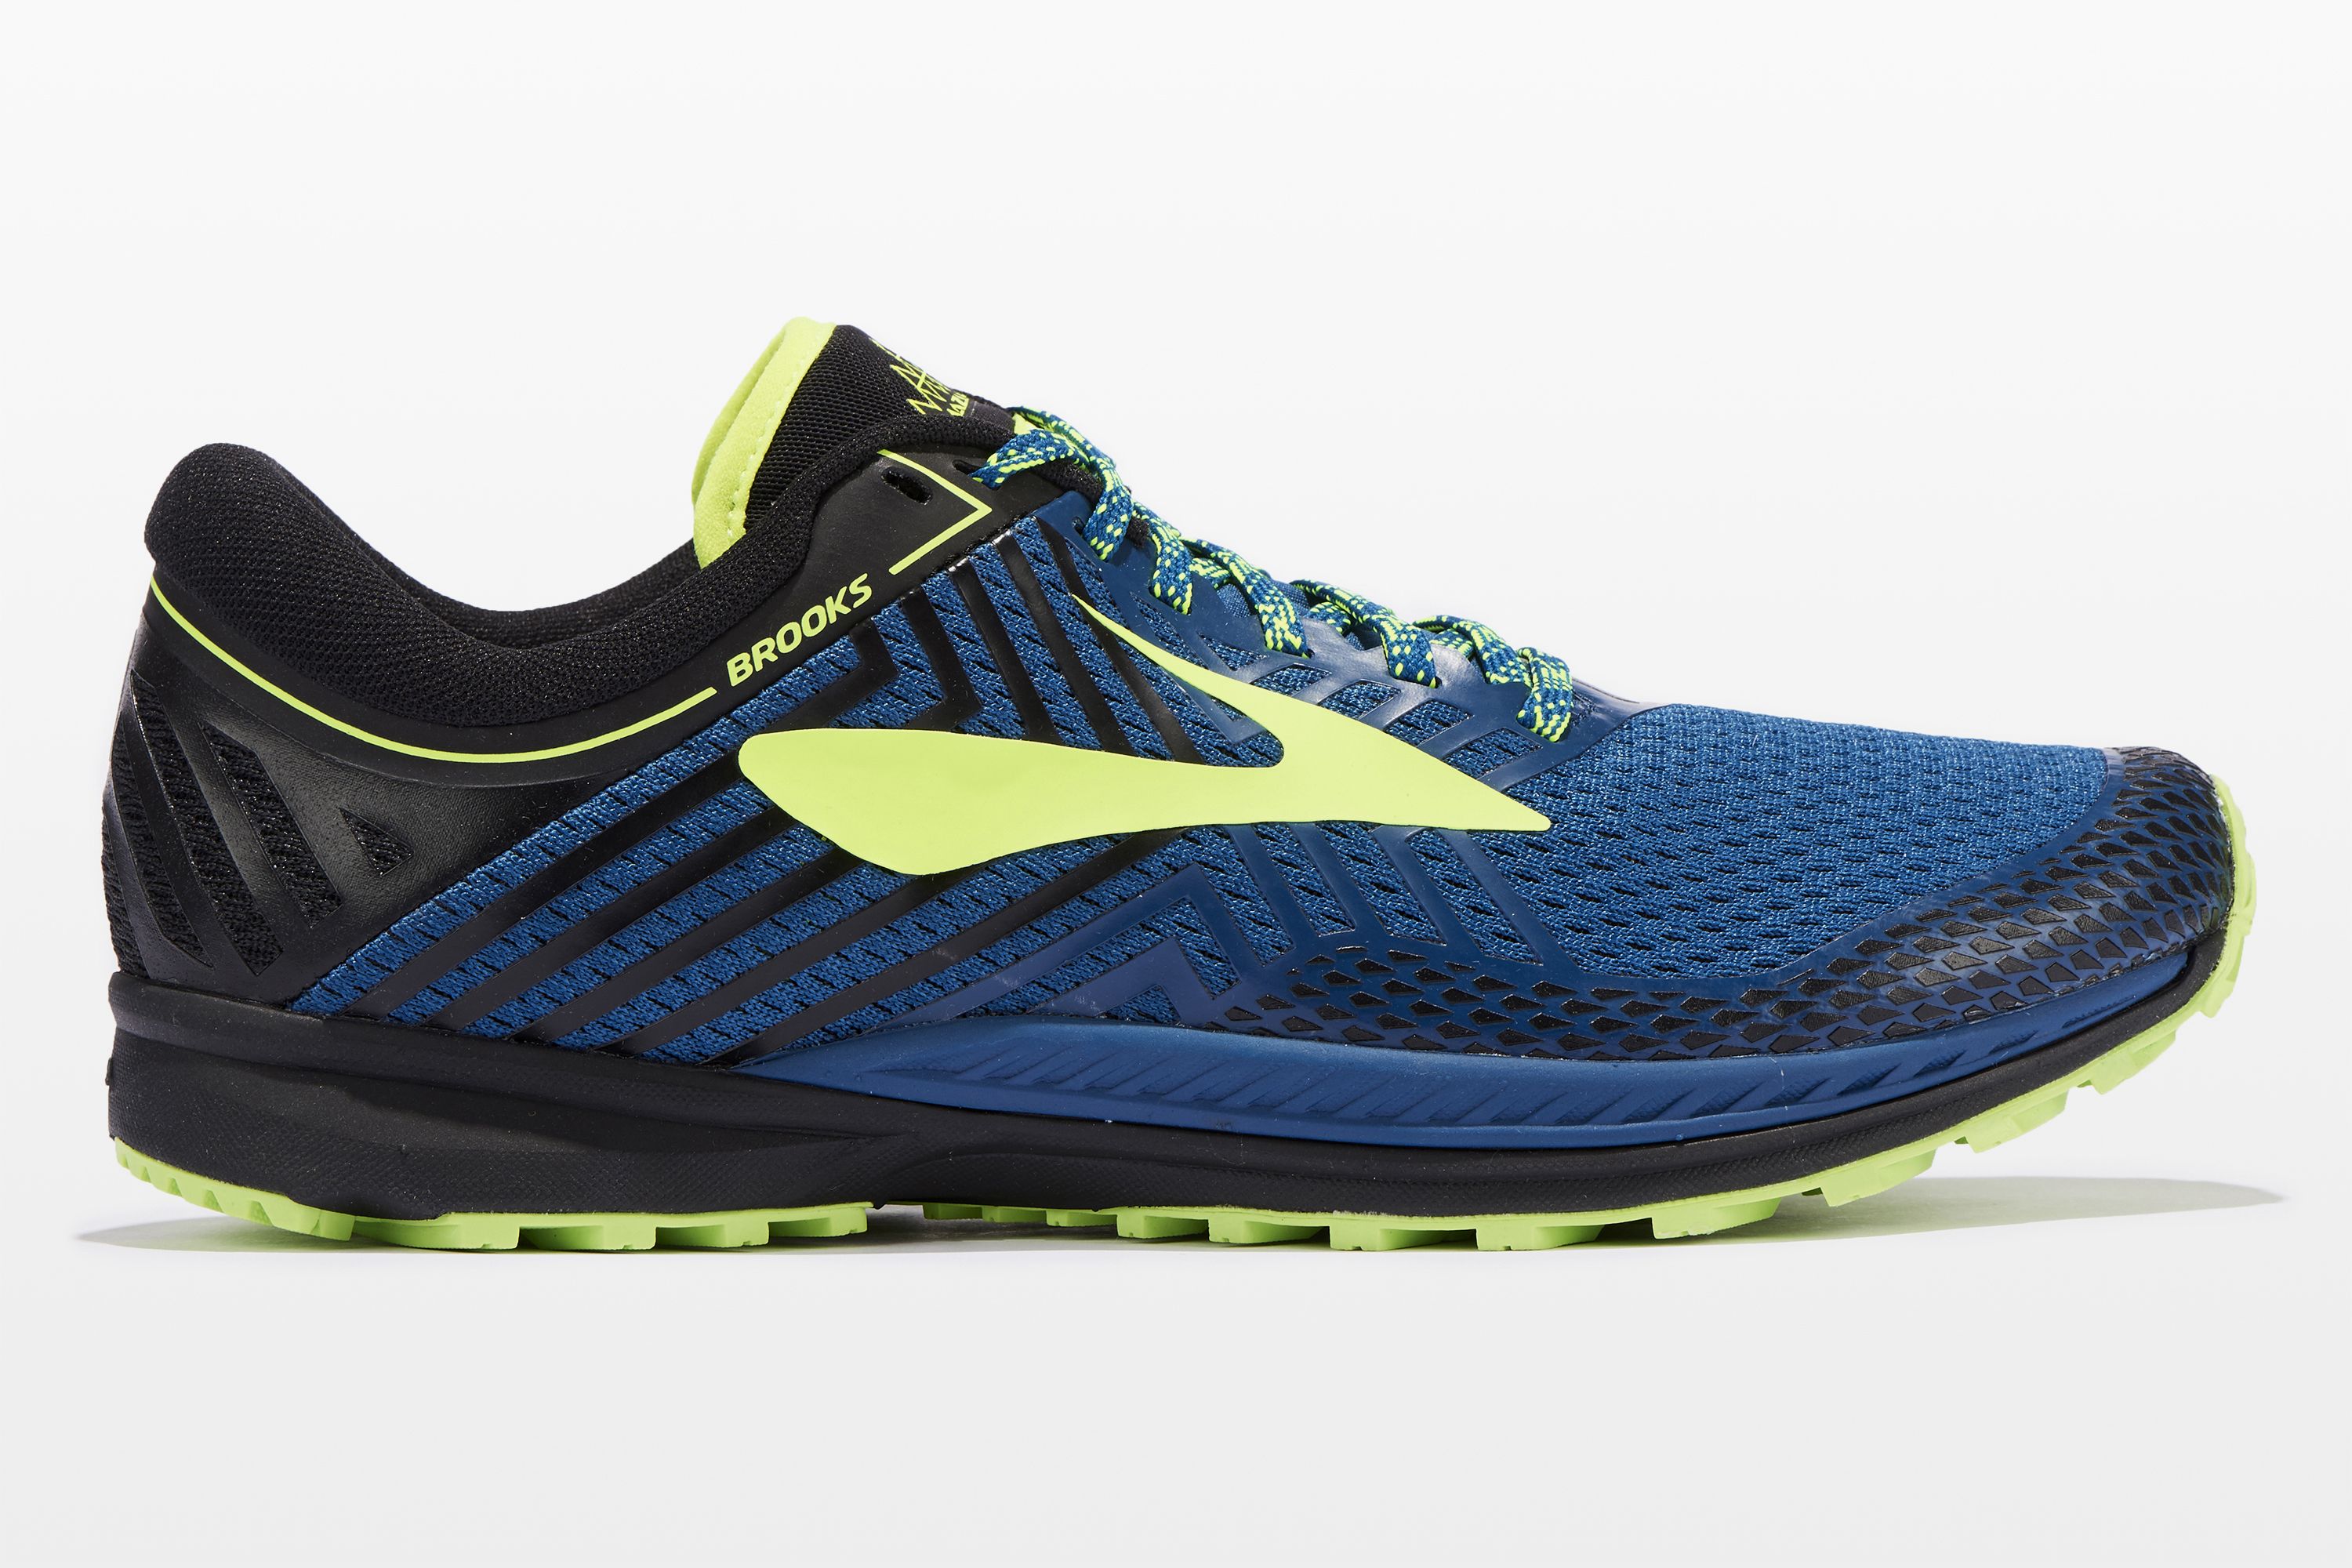 Brooks 2 | Here's We Love This and Light Trail Shoe